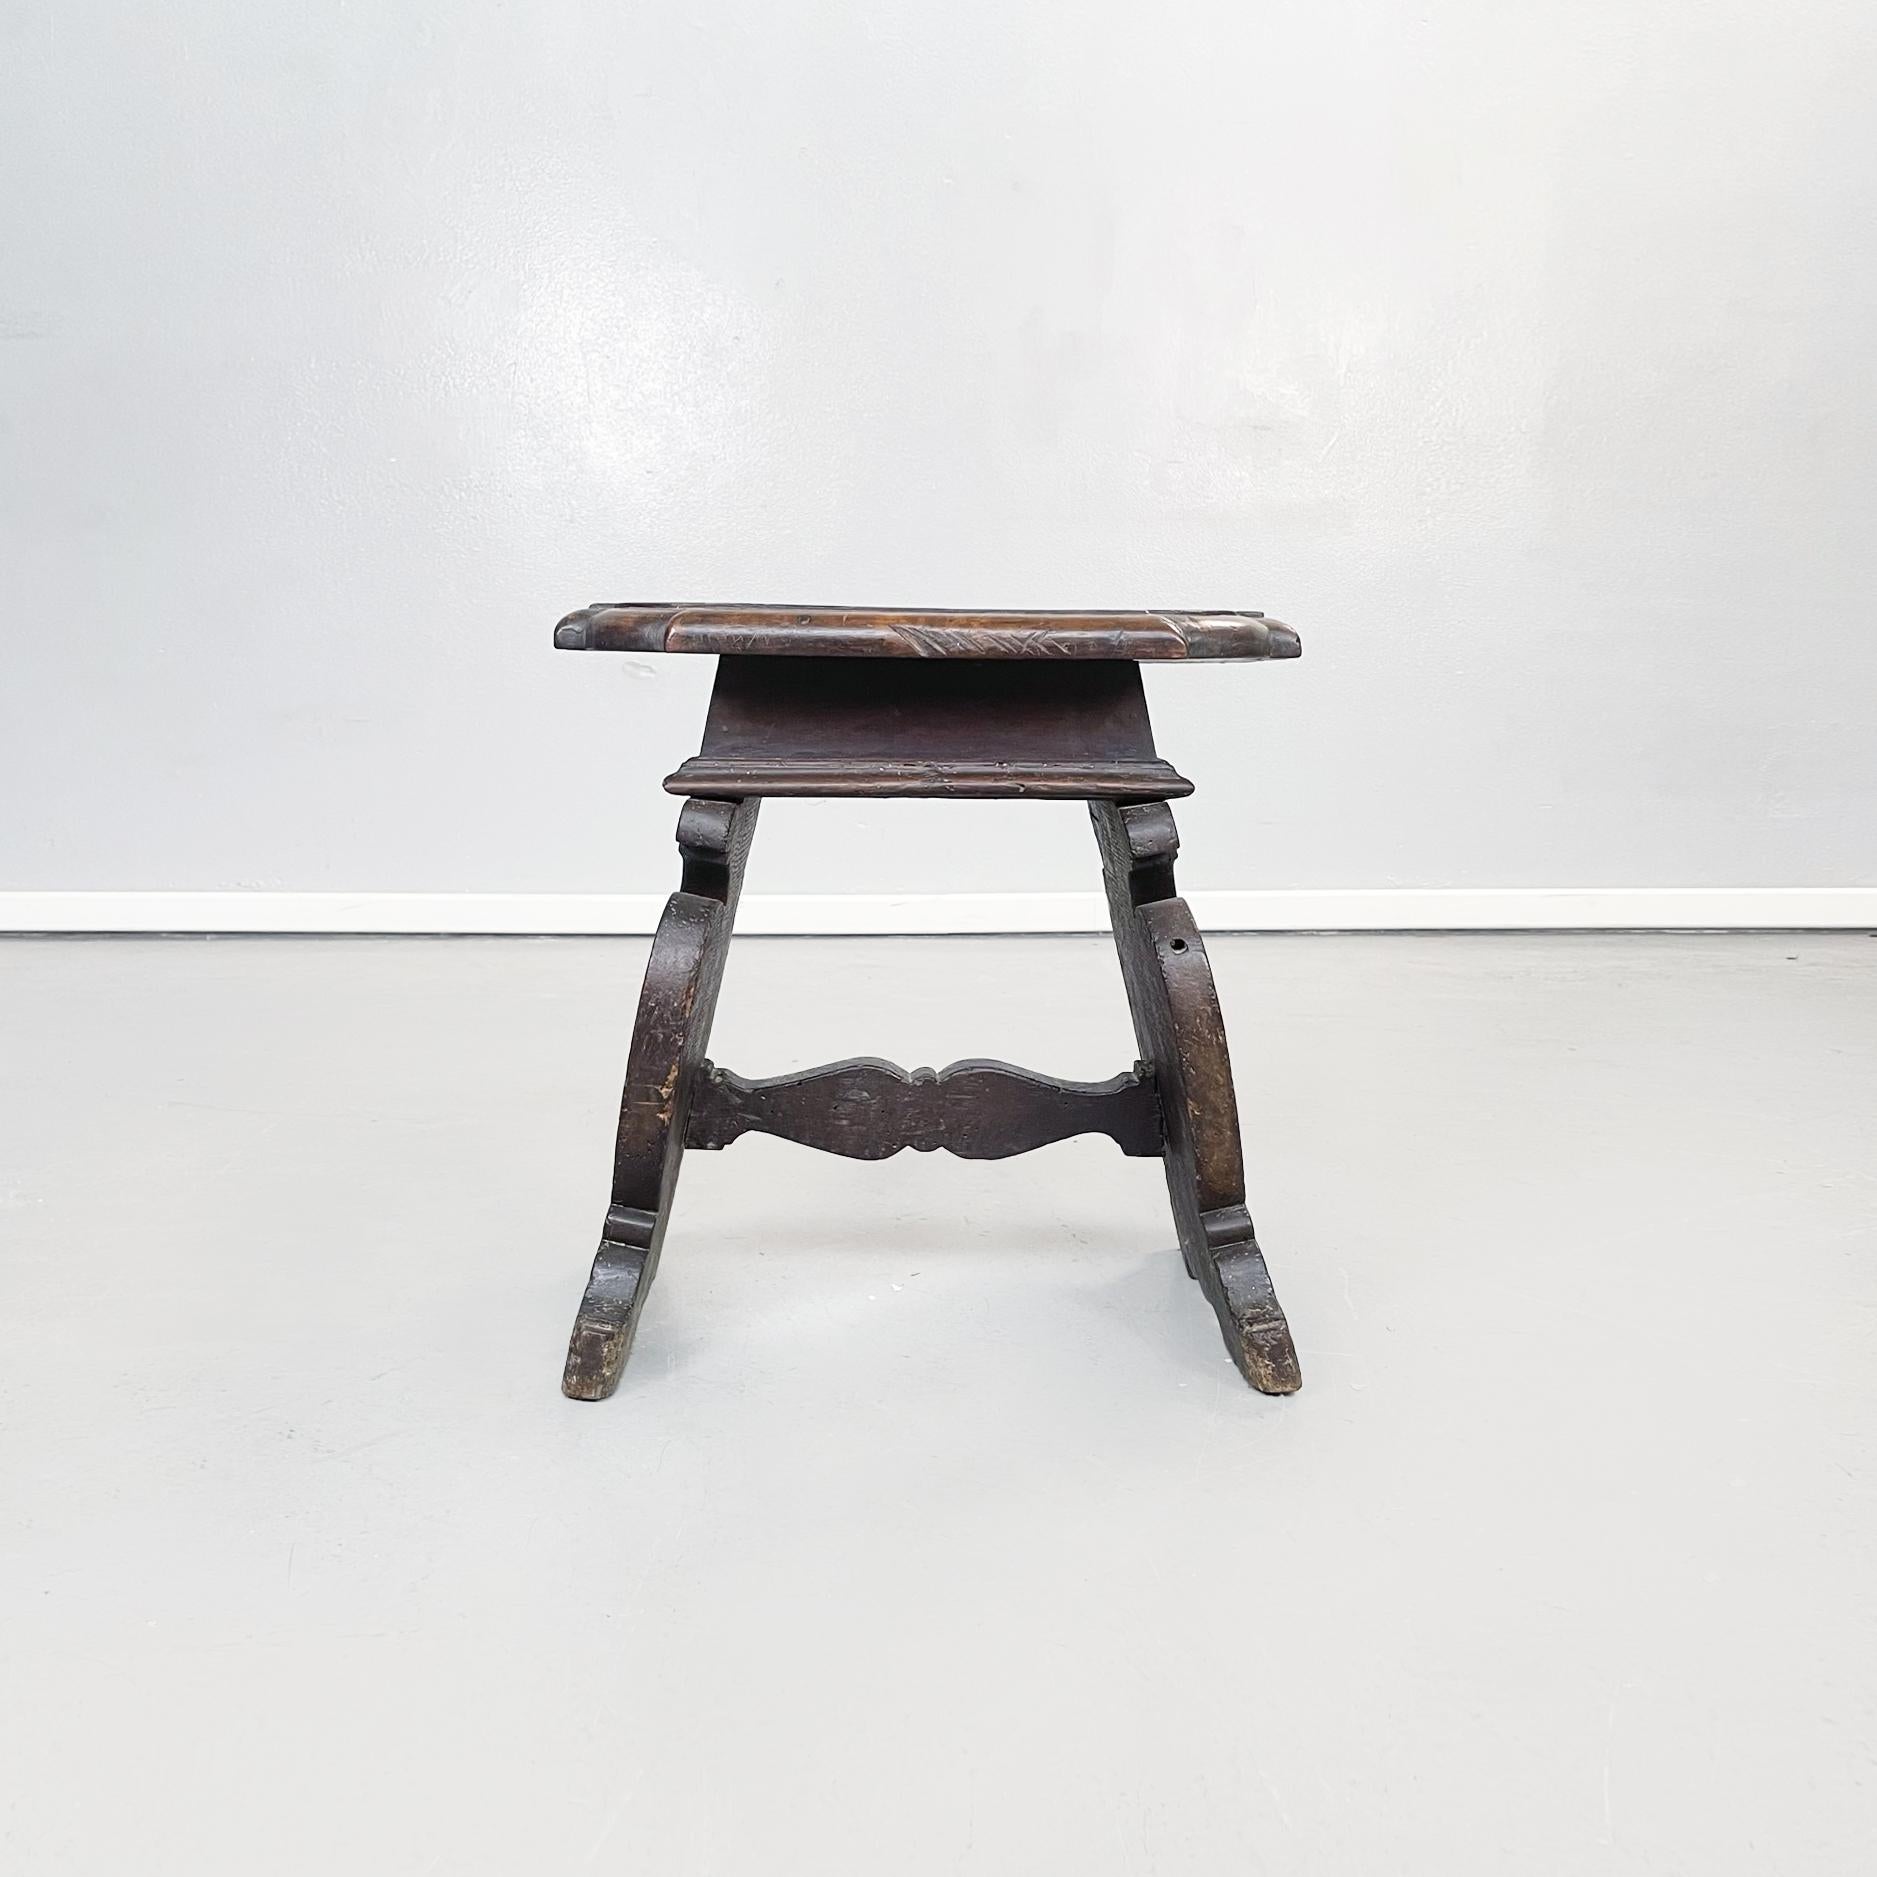 Italian Ancient stool in solid walnut wood, 1600s
Antiques stool in walnut wood, finely worked. The seat has a hole in the center. The 2 legs tend to spread downwards.
Perfect conserved and with all the patina of the time.
The legs of the stool are